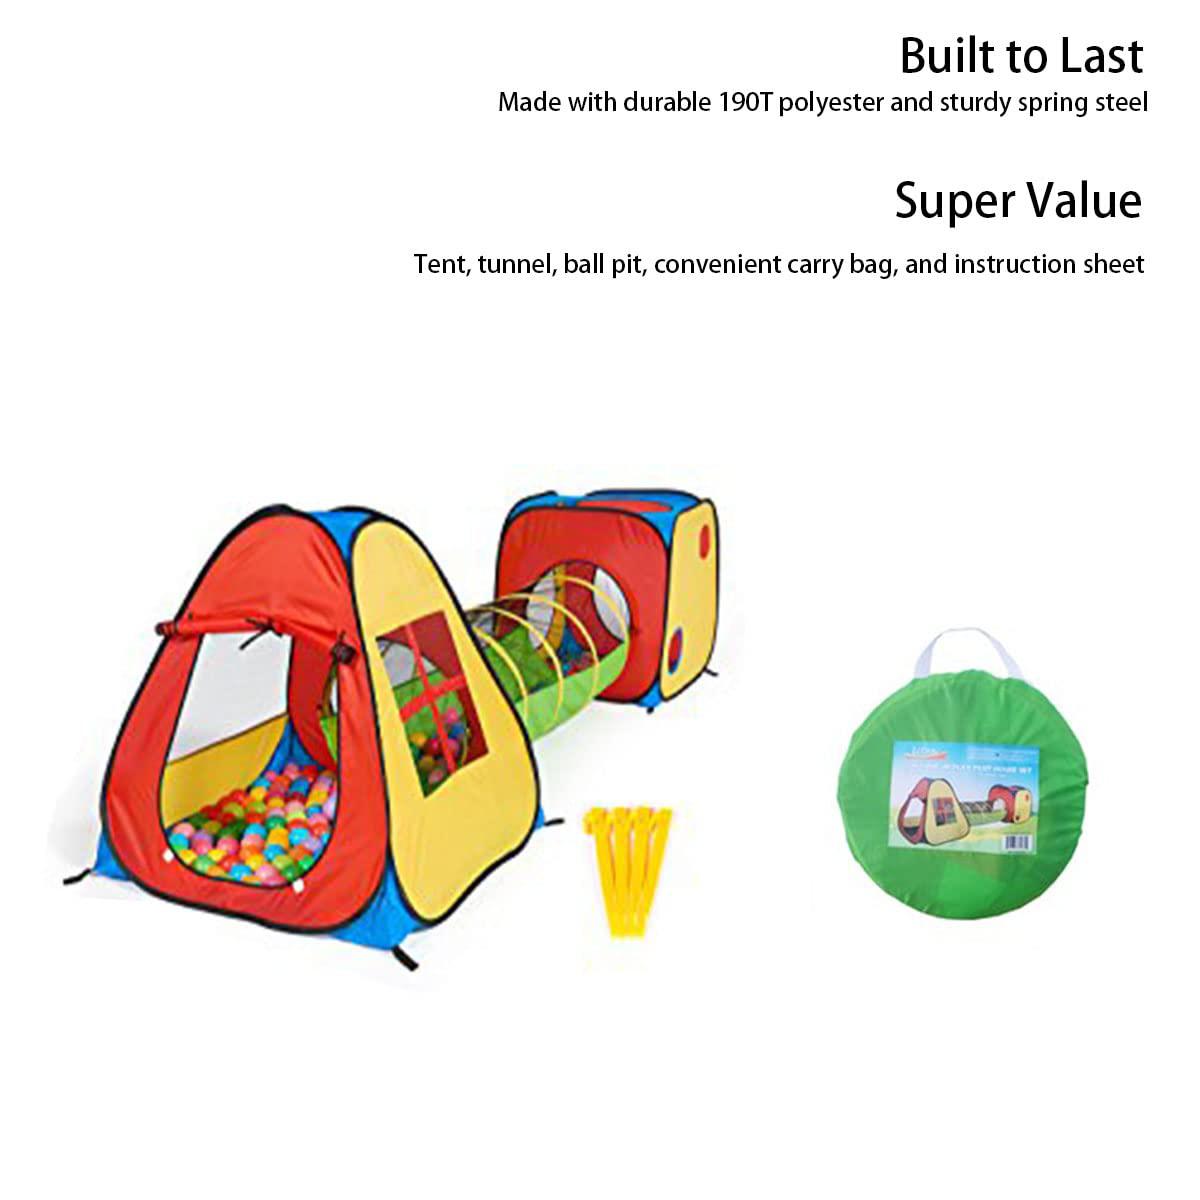 utex 3 in 1 pop up play tent with tunnel, ball pit for kids, boys, girls, babies and toddlers, indoor/outdoor playhouse?yello